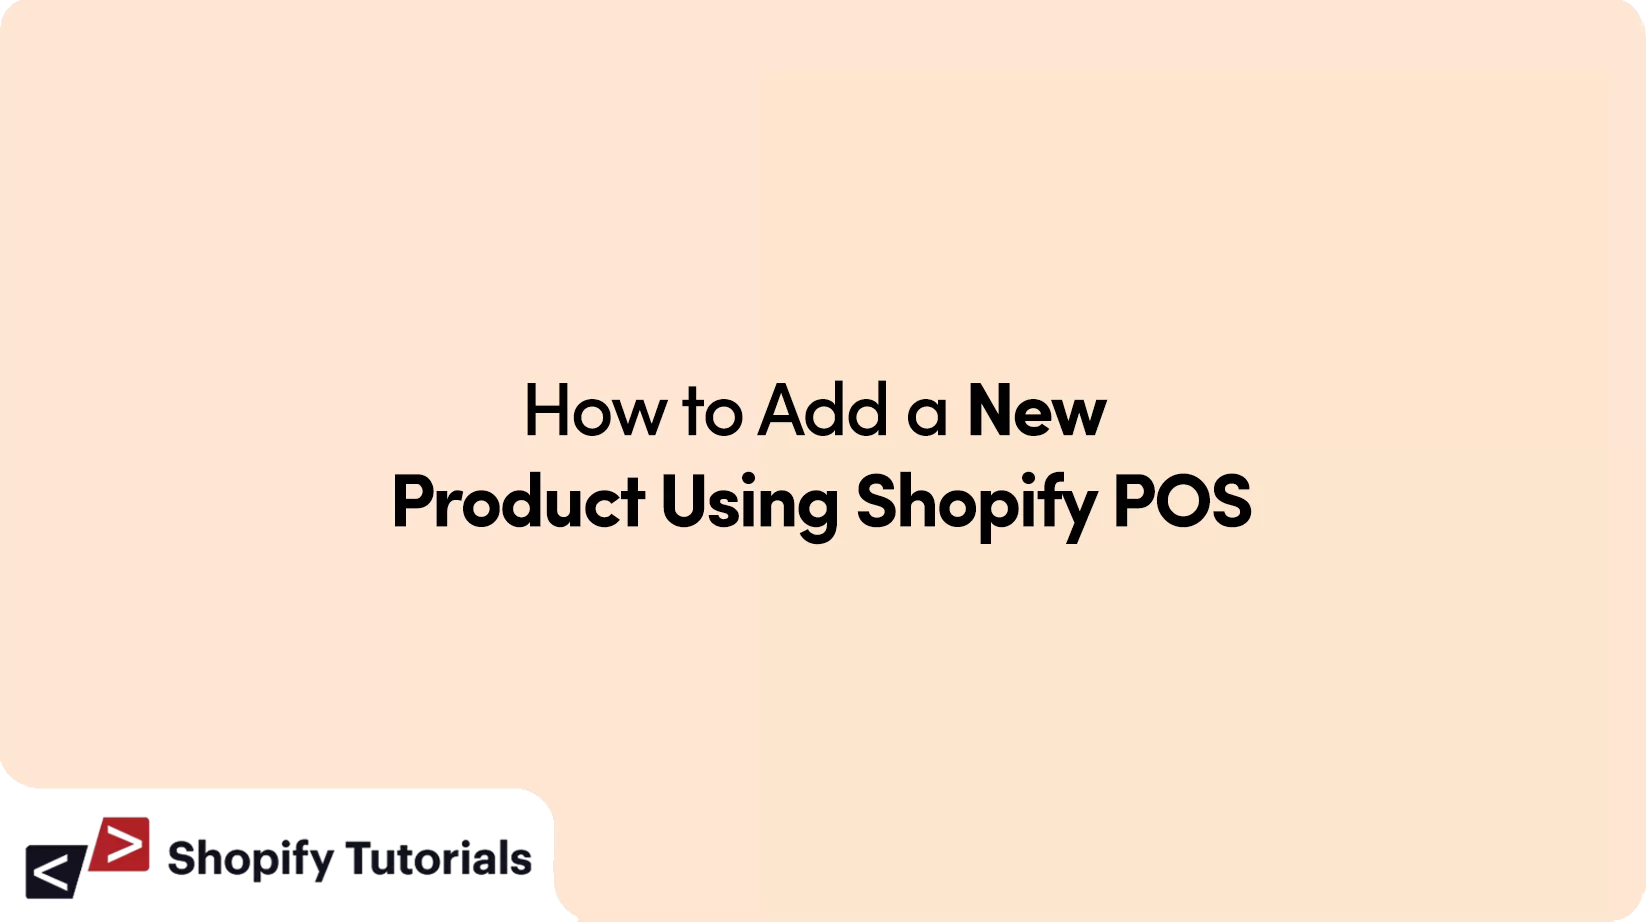 How to Add a New Product Using Shopify POS